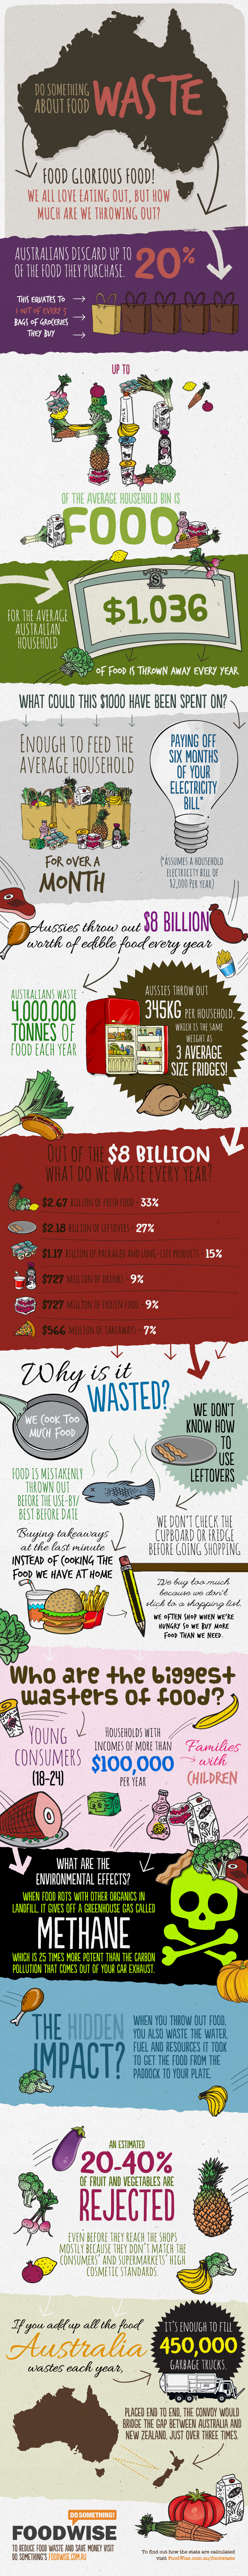 foodwaste-infographic